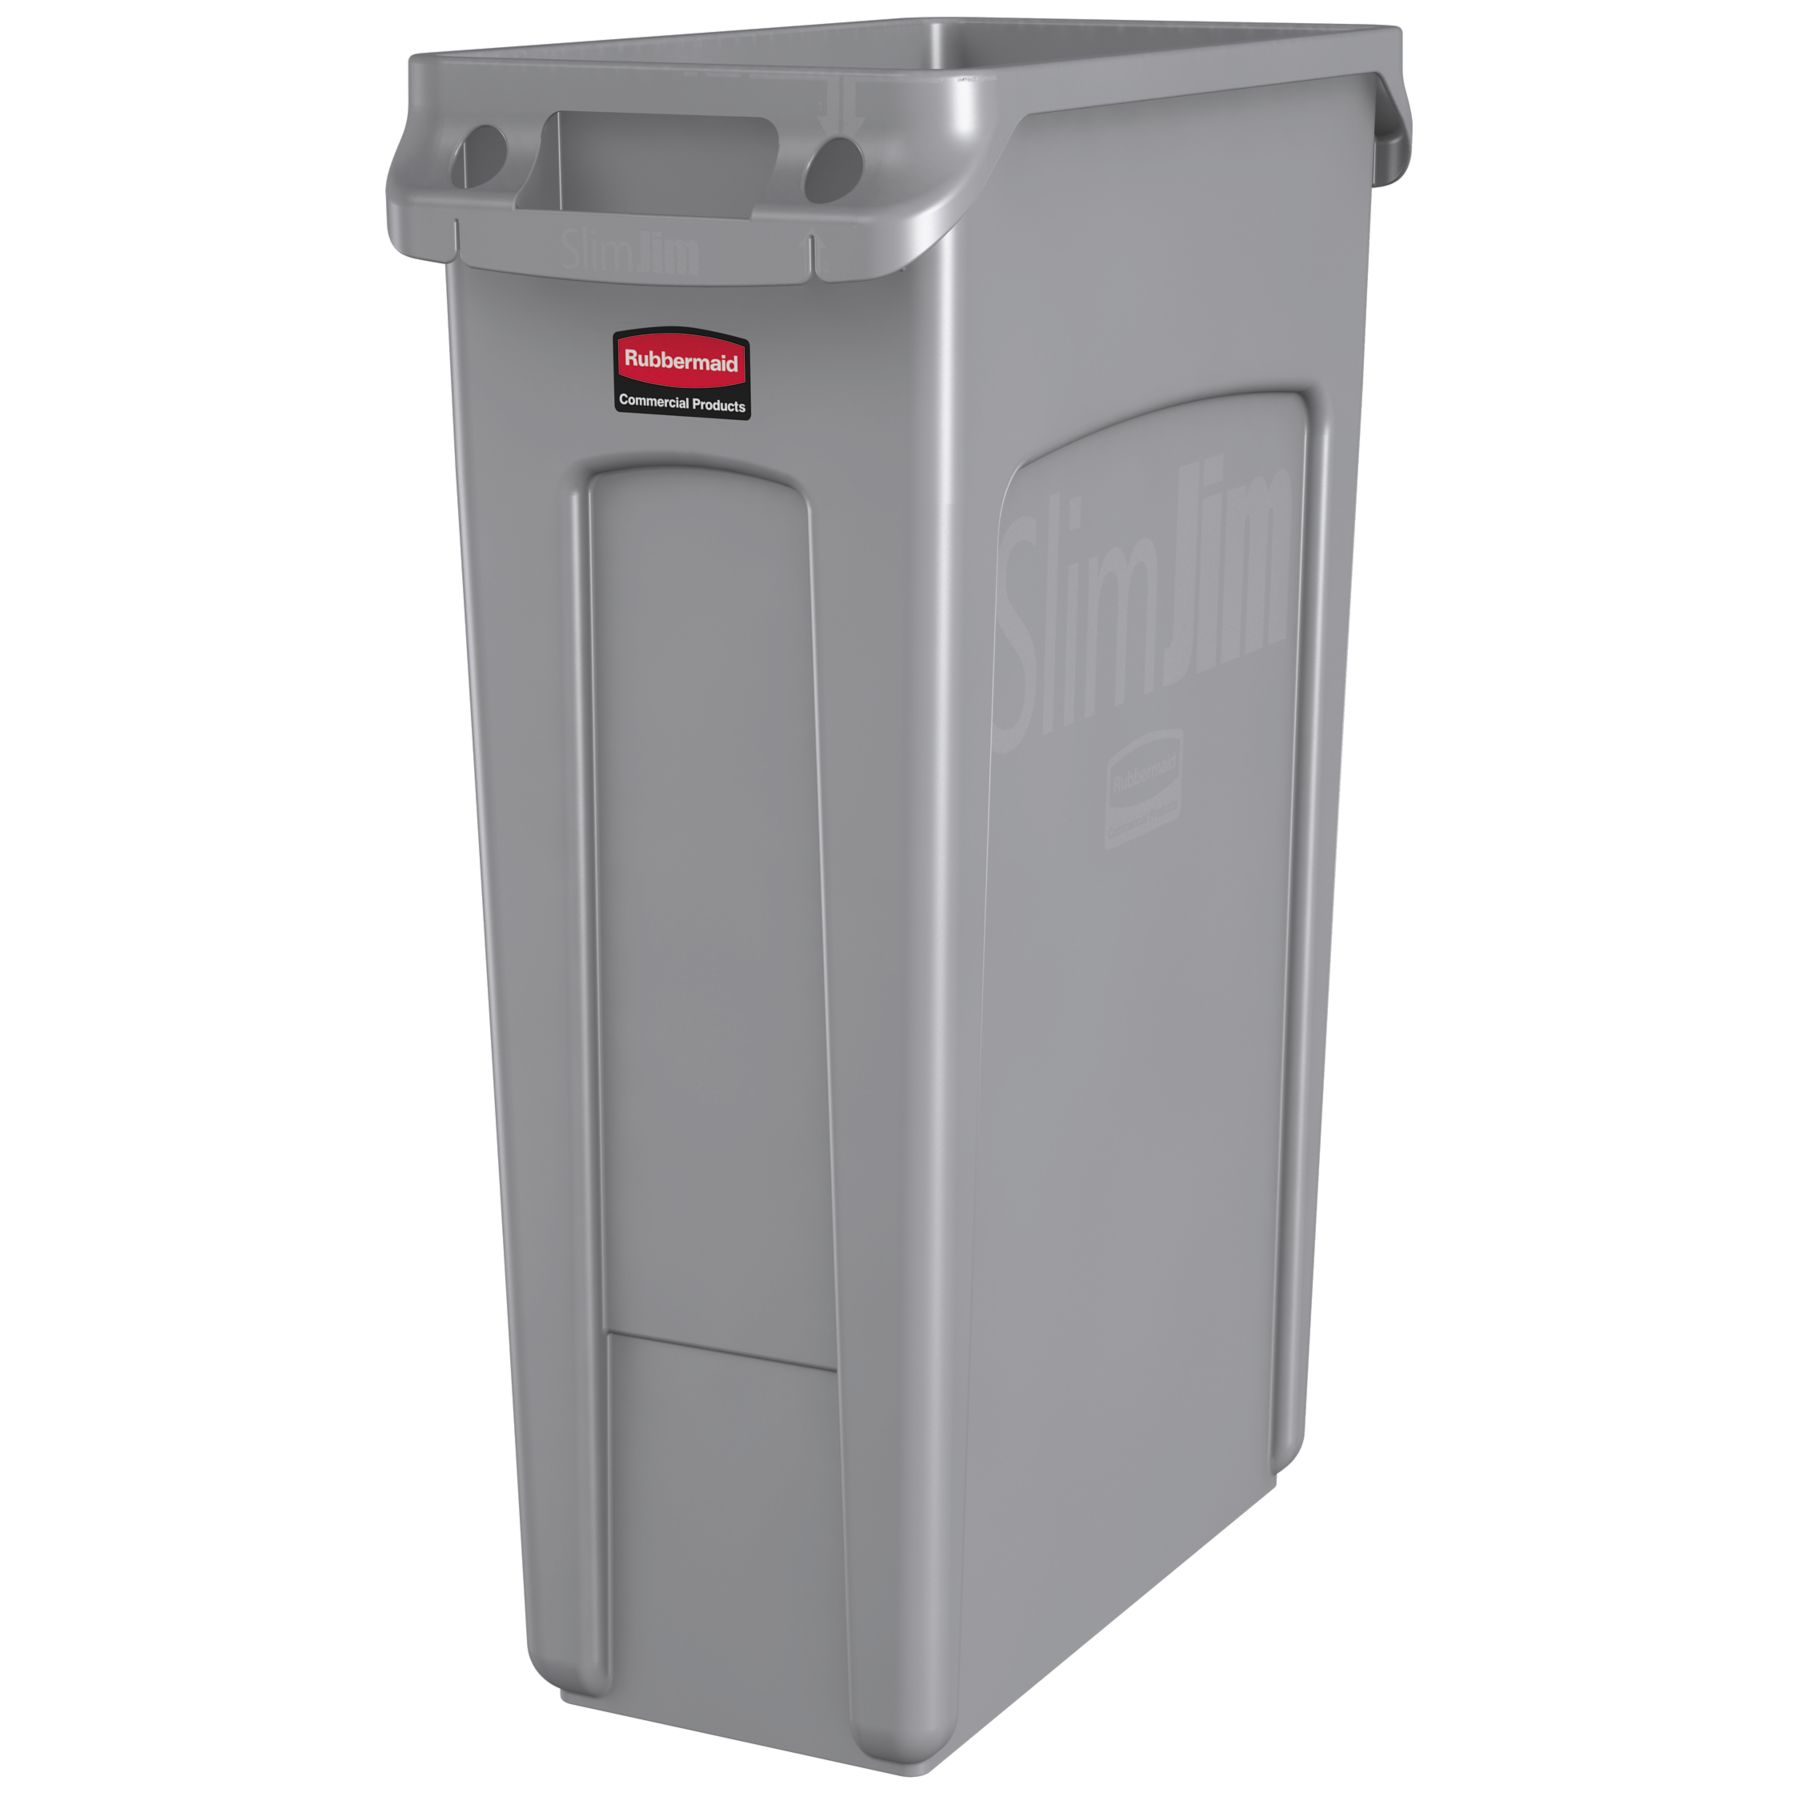 SLIM JIM WASTE CONTAINER RM3540 GRAY